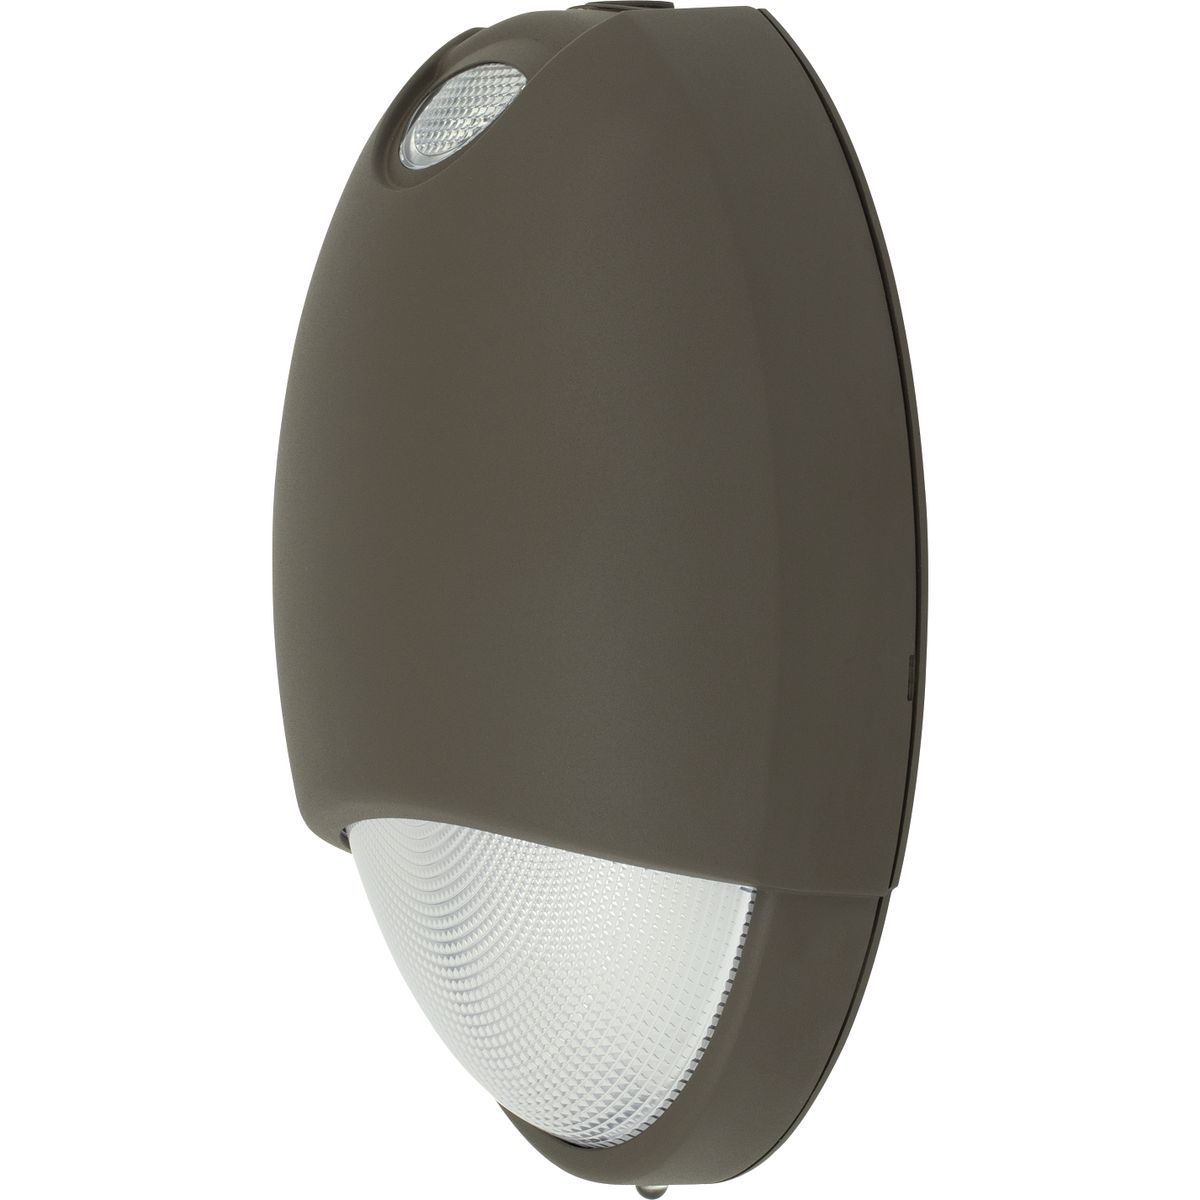 The PEOEU Series offers LED performance in  innormally on in AC and emergency lighting modes. The unit has a prismatic polycarbonate refractor with a durable die-cast aluminum housing with a durable dark bronze powder coated finish. The housing is fully sealed and gasketed. It is designed for wall mounting with a universal K/O pattern in the back-plate for installation to most standard size junction boxes. Illumination is provided by 2 high power LEDs driven at 3 watts each. The PEOEU Series can be applied in areas that are susceptible to rain and severe moisture, such as parking decks and outdoor commercial applications.